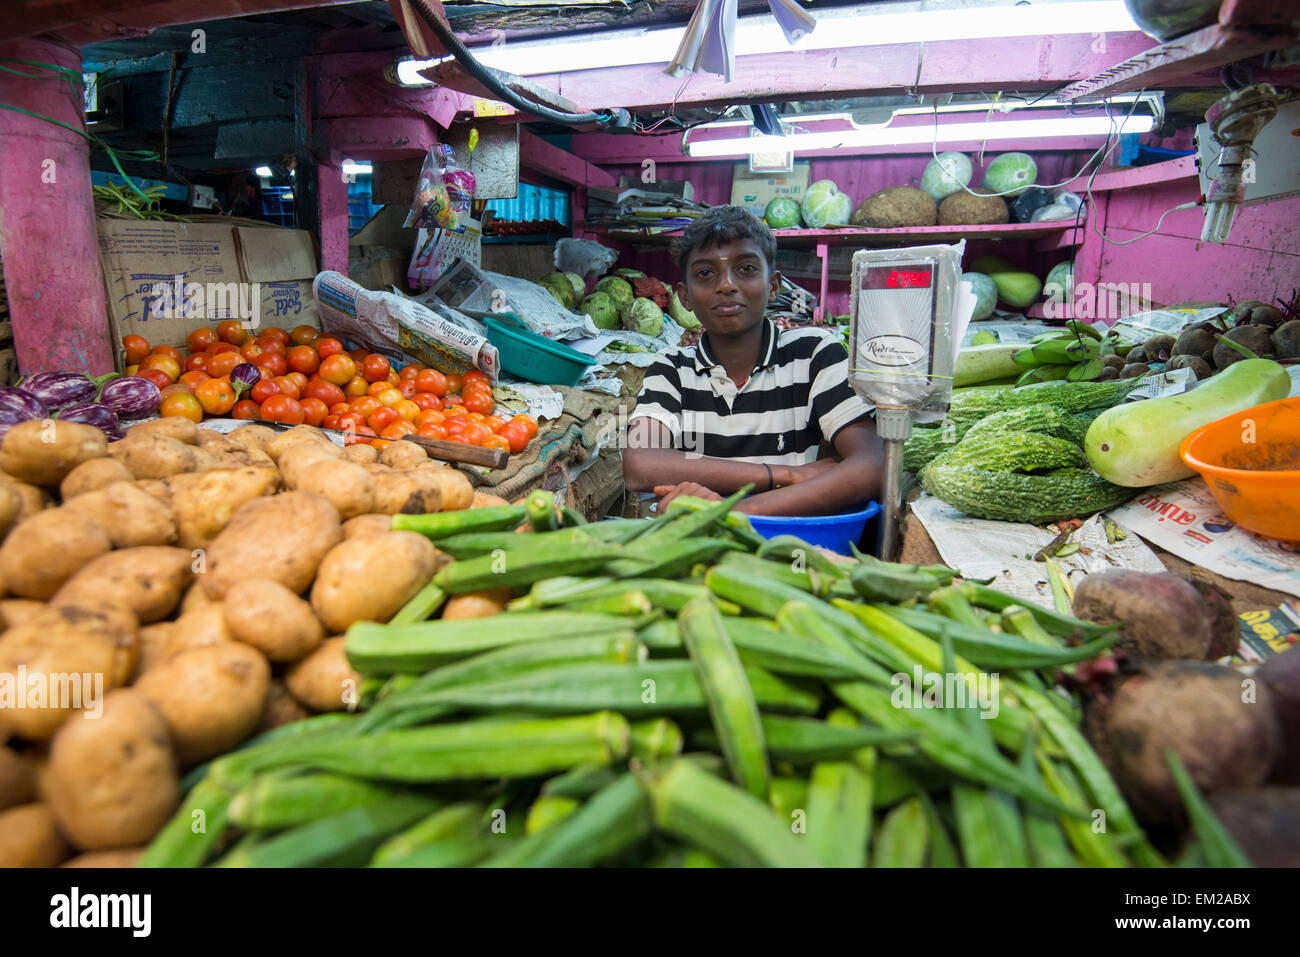 A young boy working on a vegetable stall in the market at Munnar, Kerala India Stock Photo